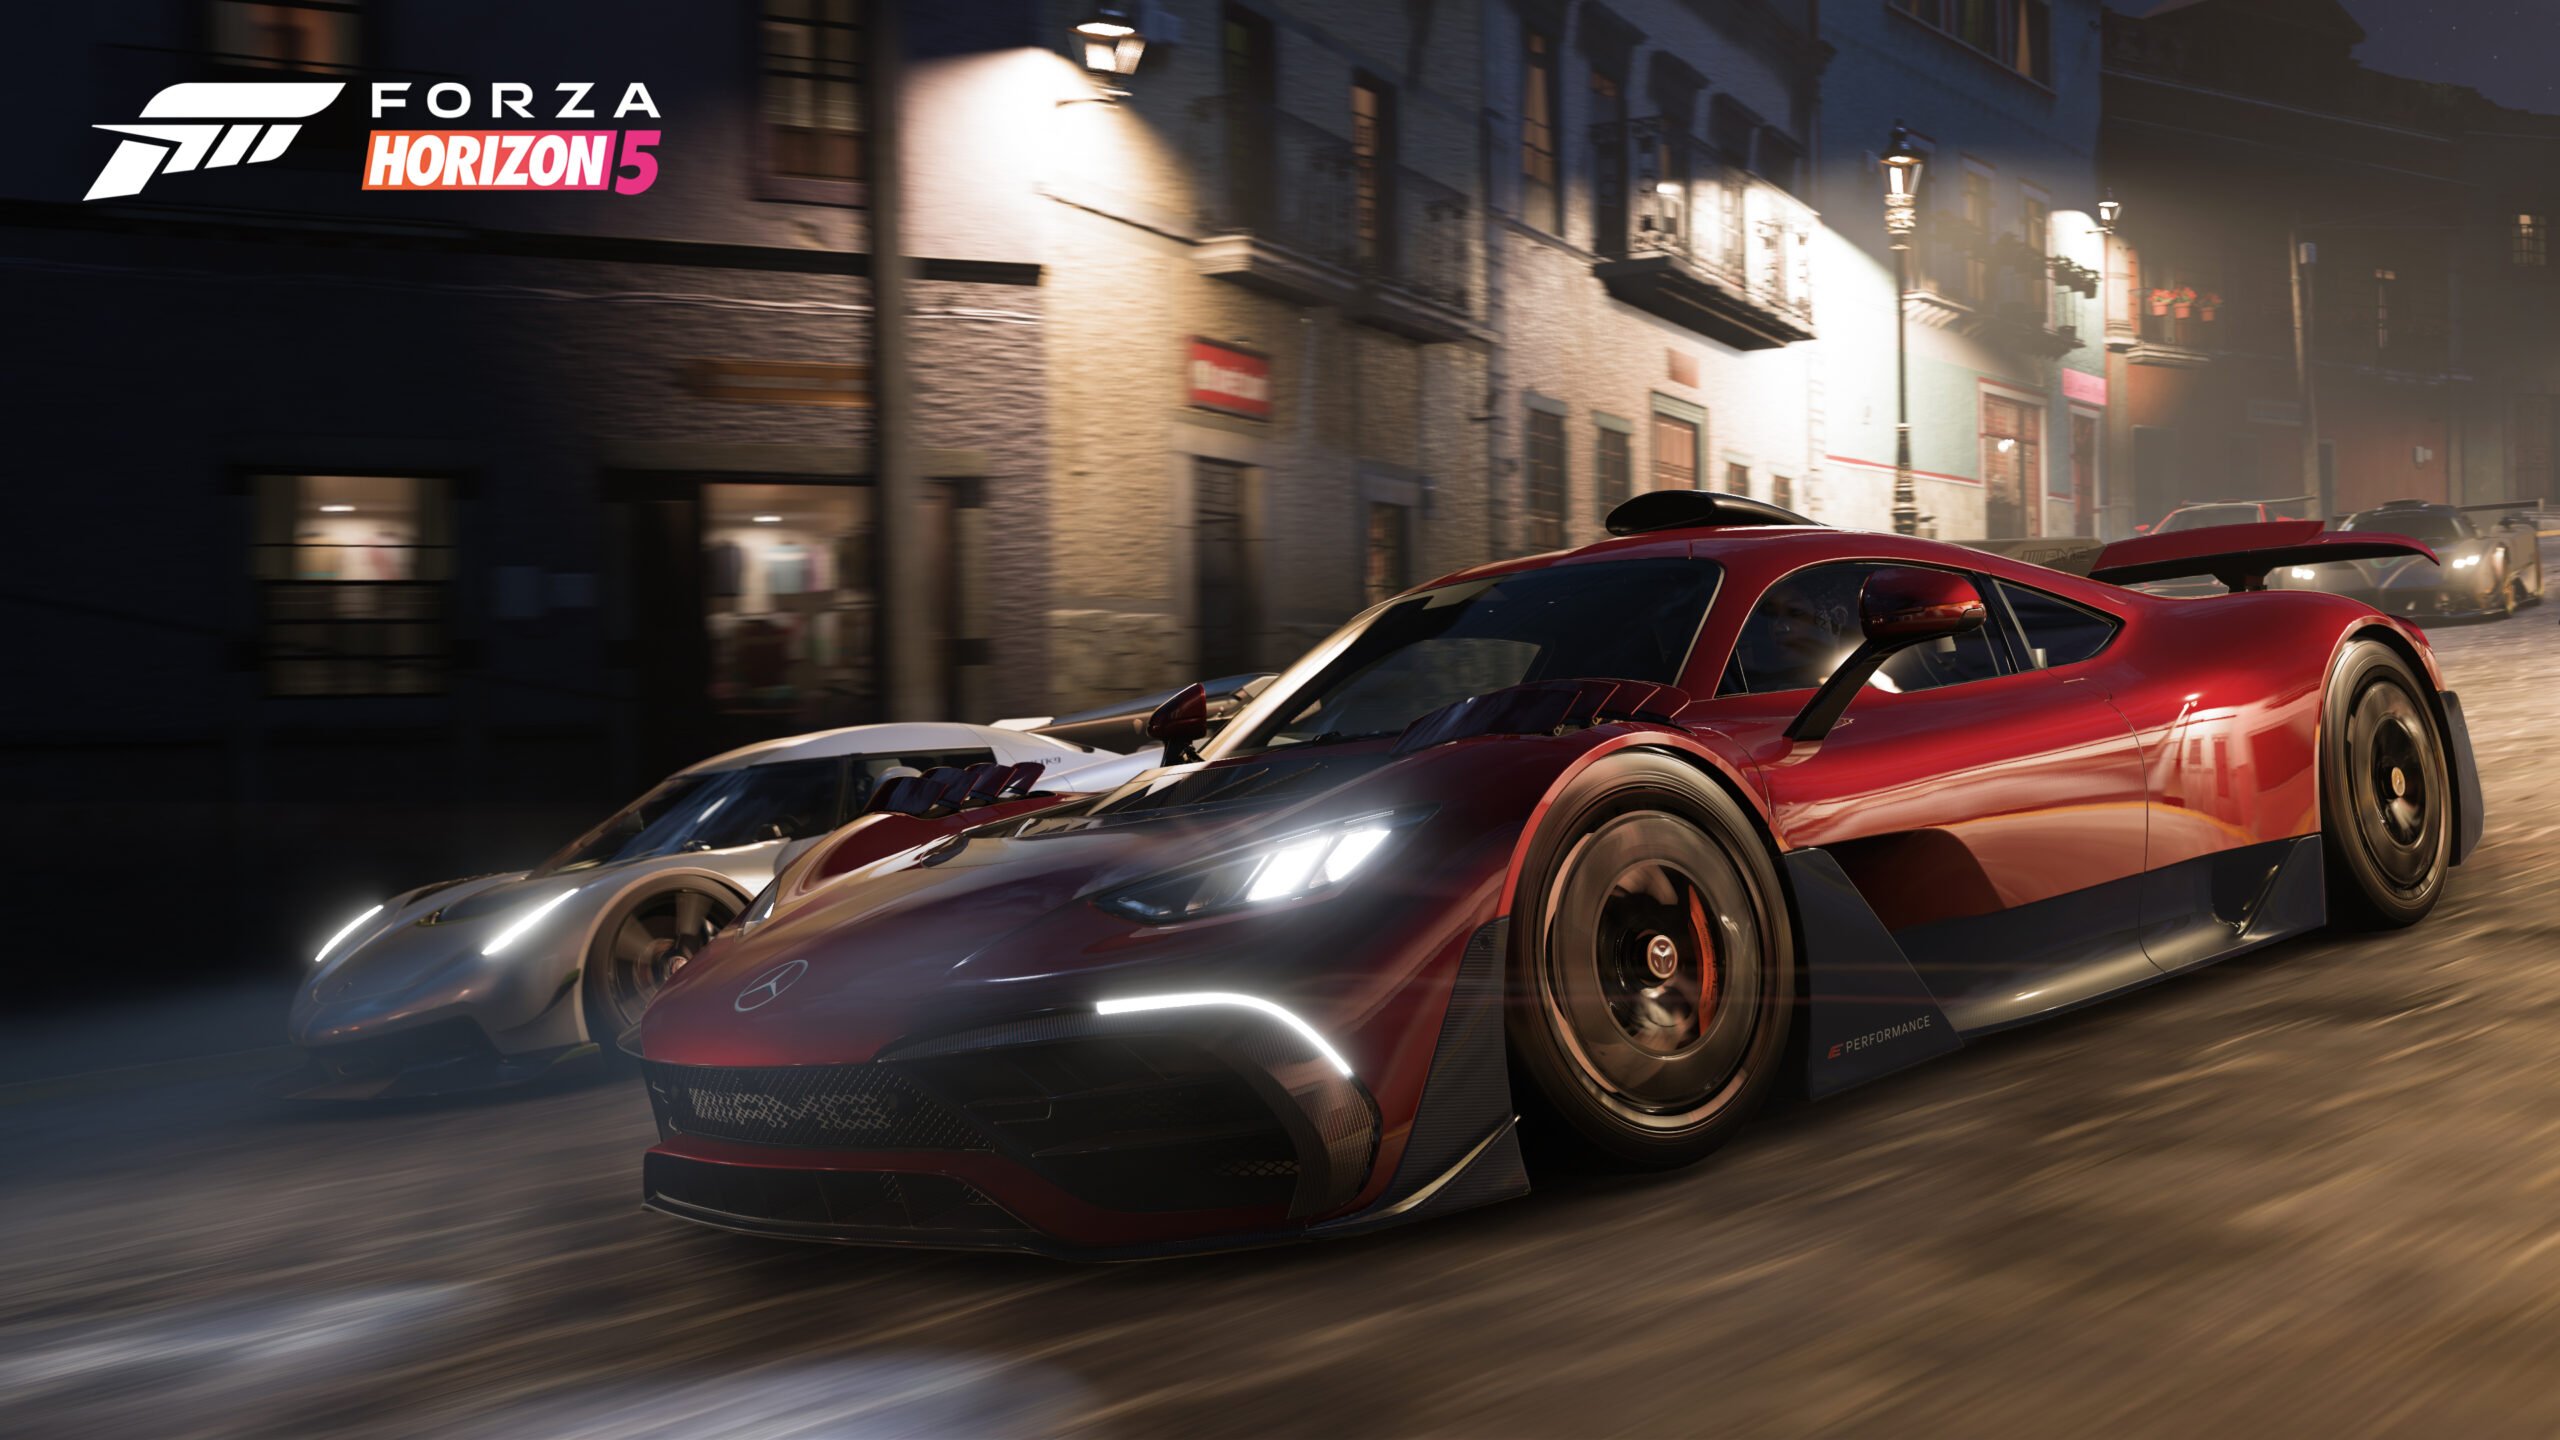 The latest Forza Horizon 5 video shows off the first 8 minutes of